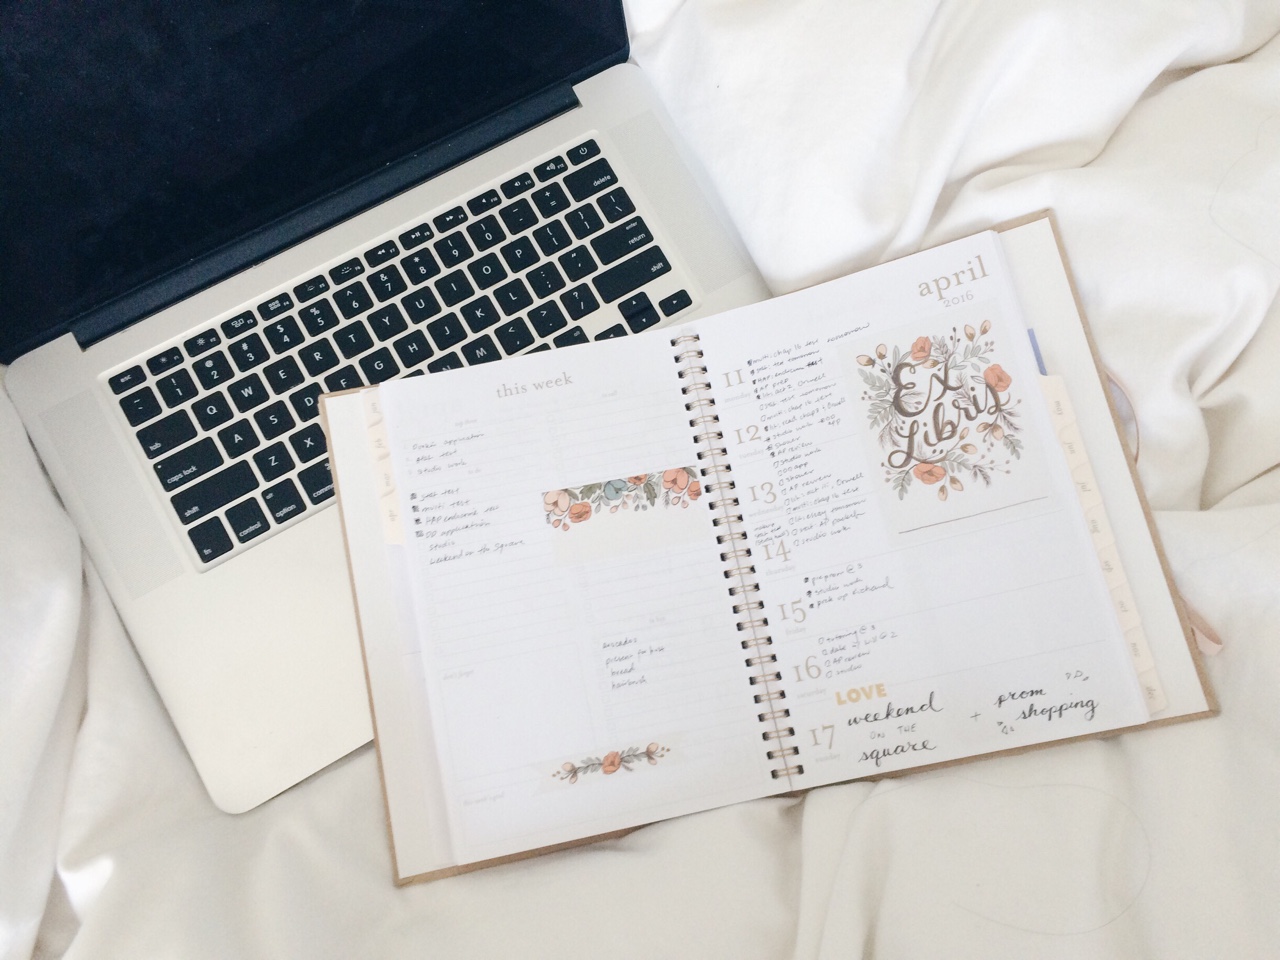 Super charge your study sessions with some inspiring study blogs from tumblr. Check out printables, images and collections (and tips) to get the most out of every study session in style.